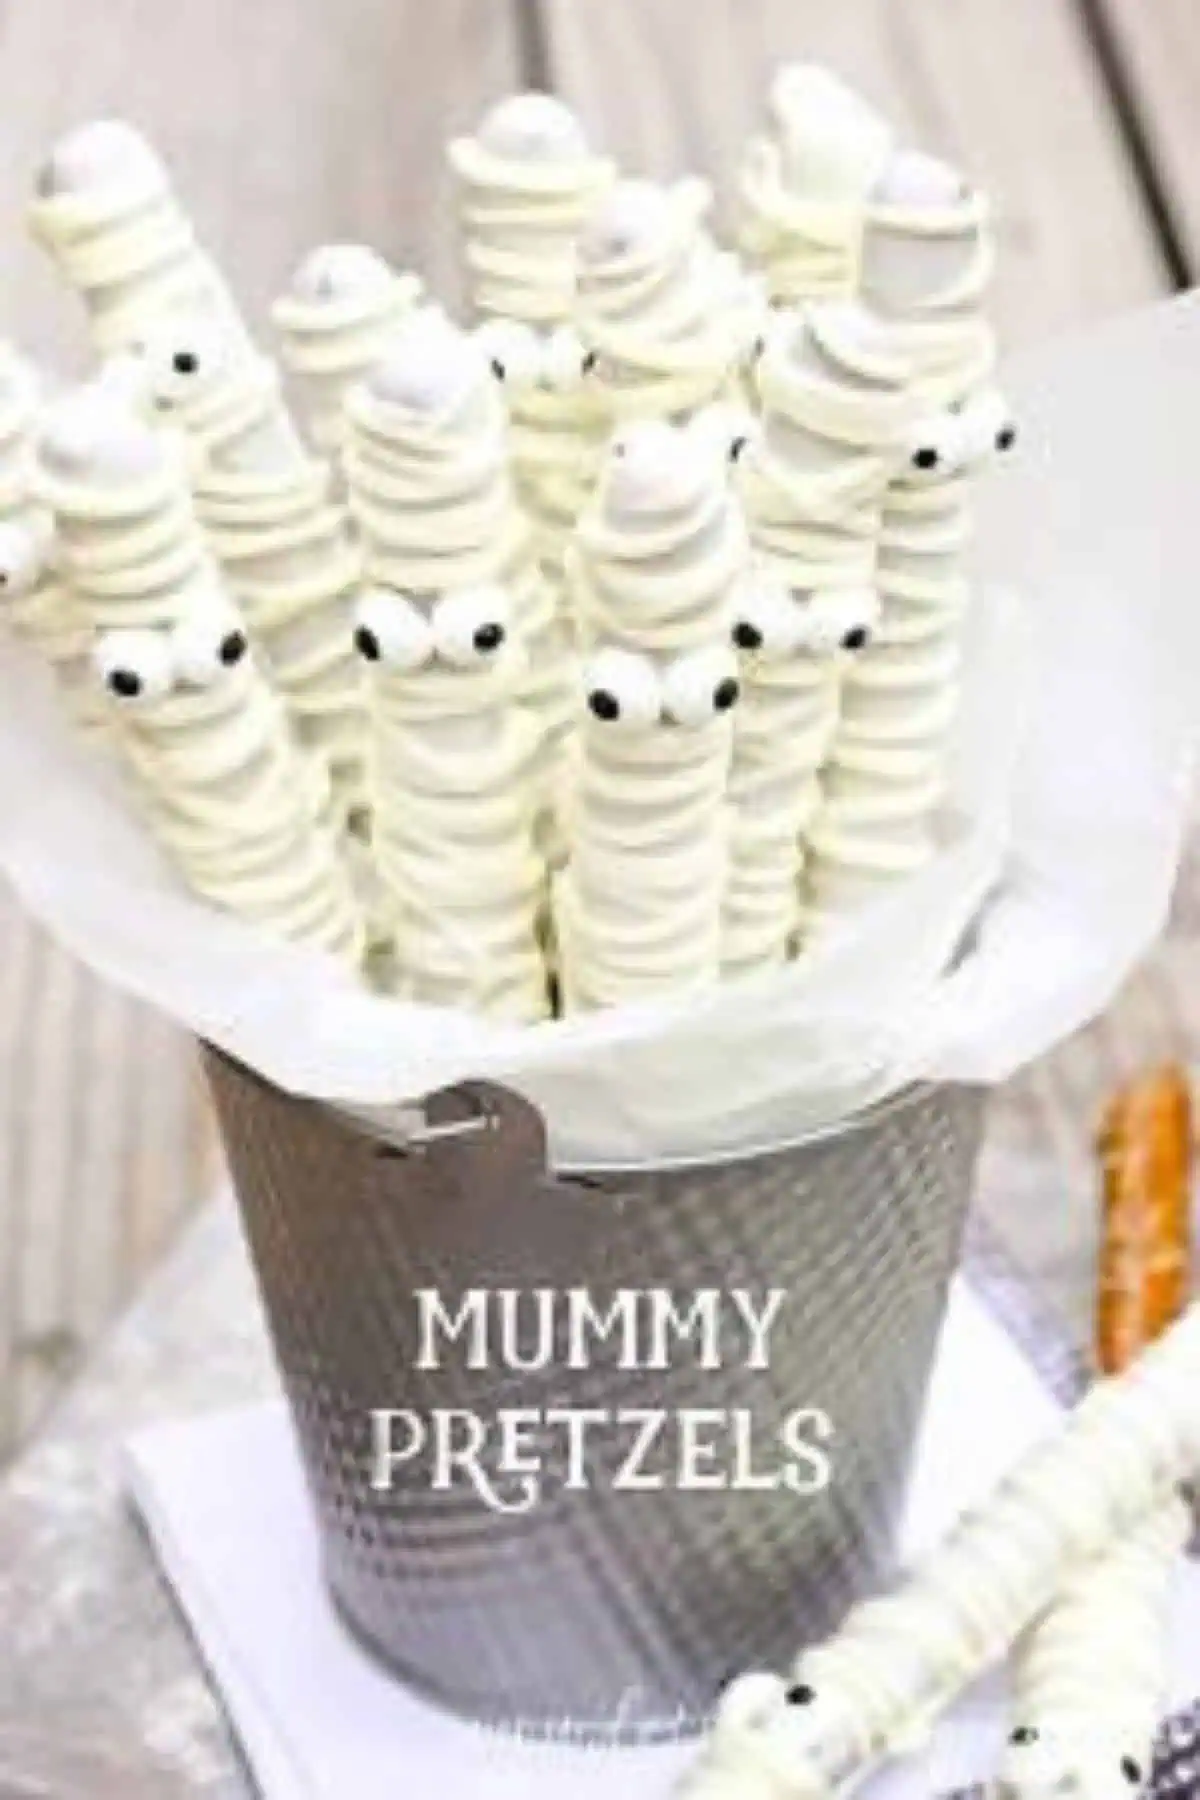 Preztels dipped in white chocolate and made to look like mummies for a halloween themed fall treat